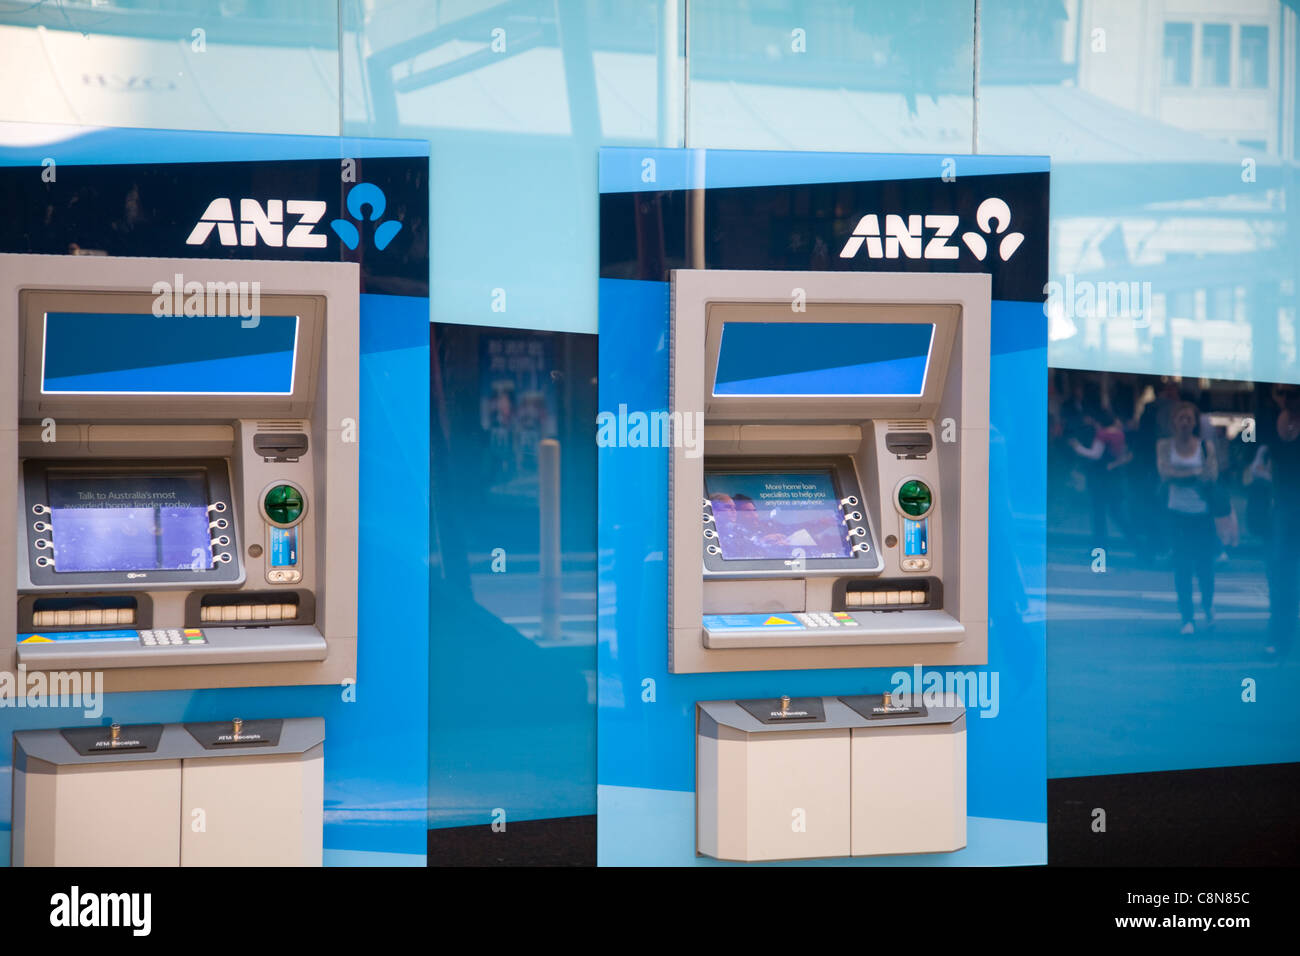 ANZ anz bank with two ATM machines outside,sydney,australia Stock Photo